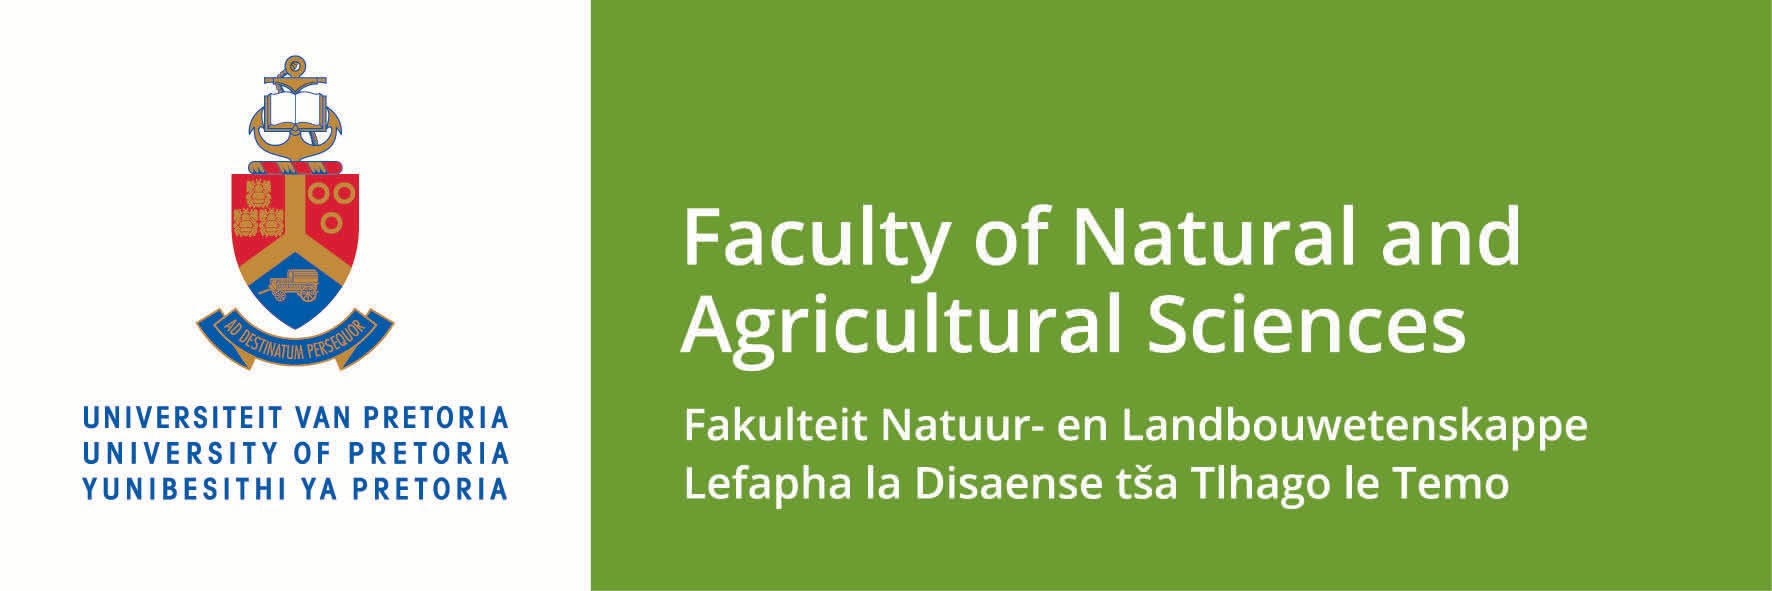 Faculty of Natural and Agricultural Sciences